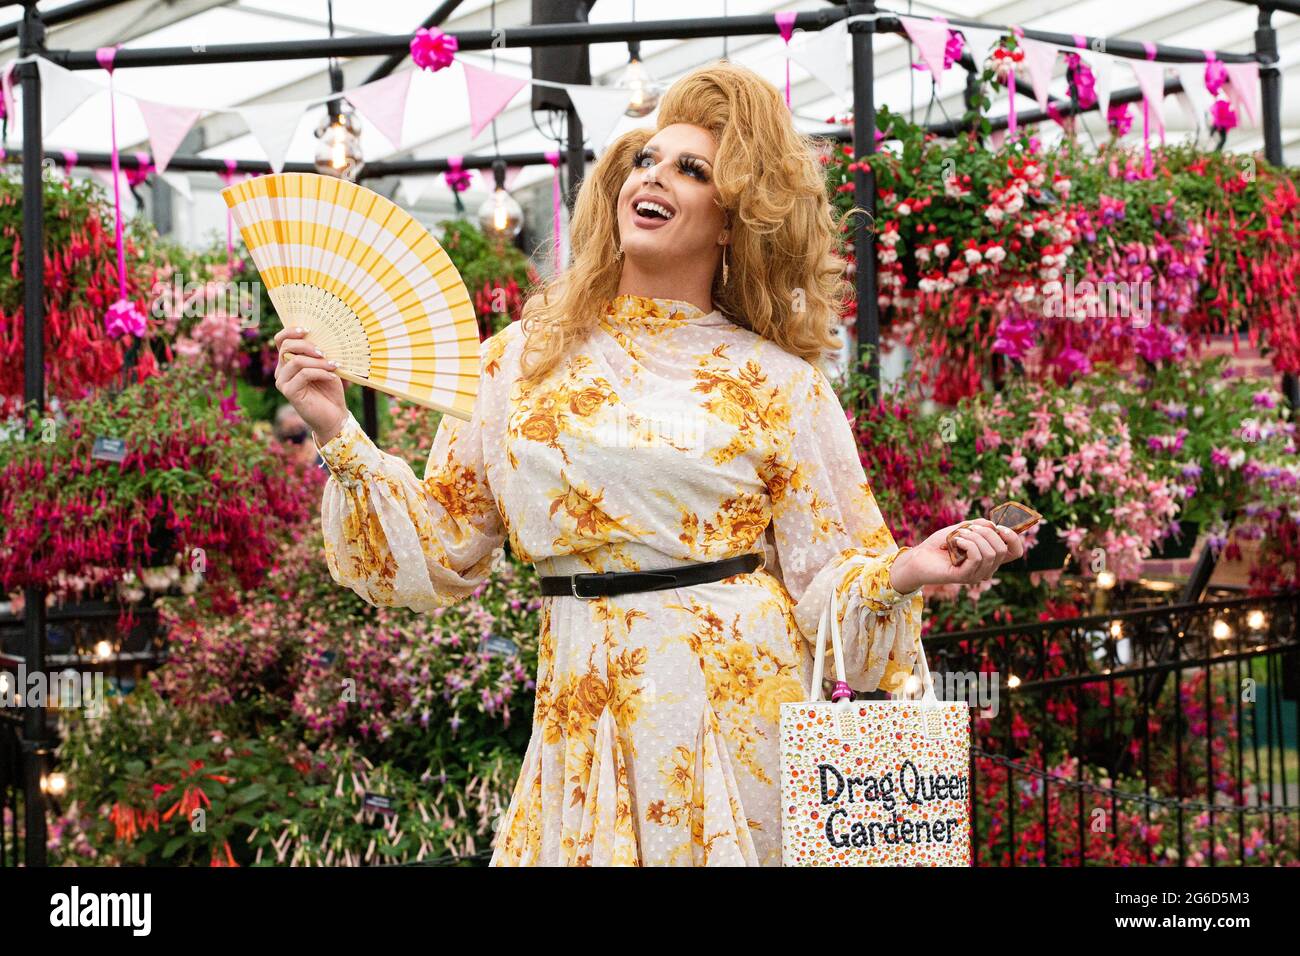 London, UK. 5th July, 2021. Drag Queen Daisy Desire, The Drag Queen Gardener. Press preview of the RHS Hampton Court Palace Garden Festival which runs from July 6th-July 11th. Credit: Mark Thomas/Alamy Live News Stock Photo